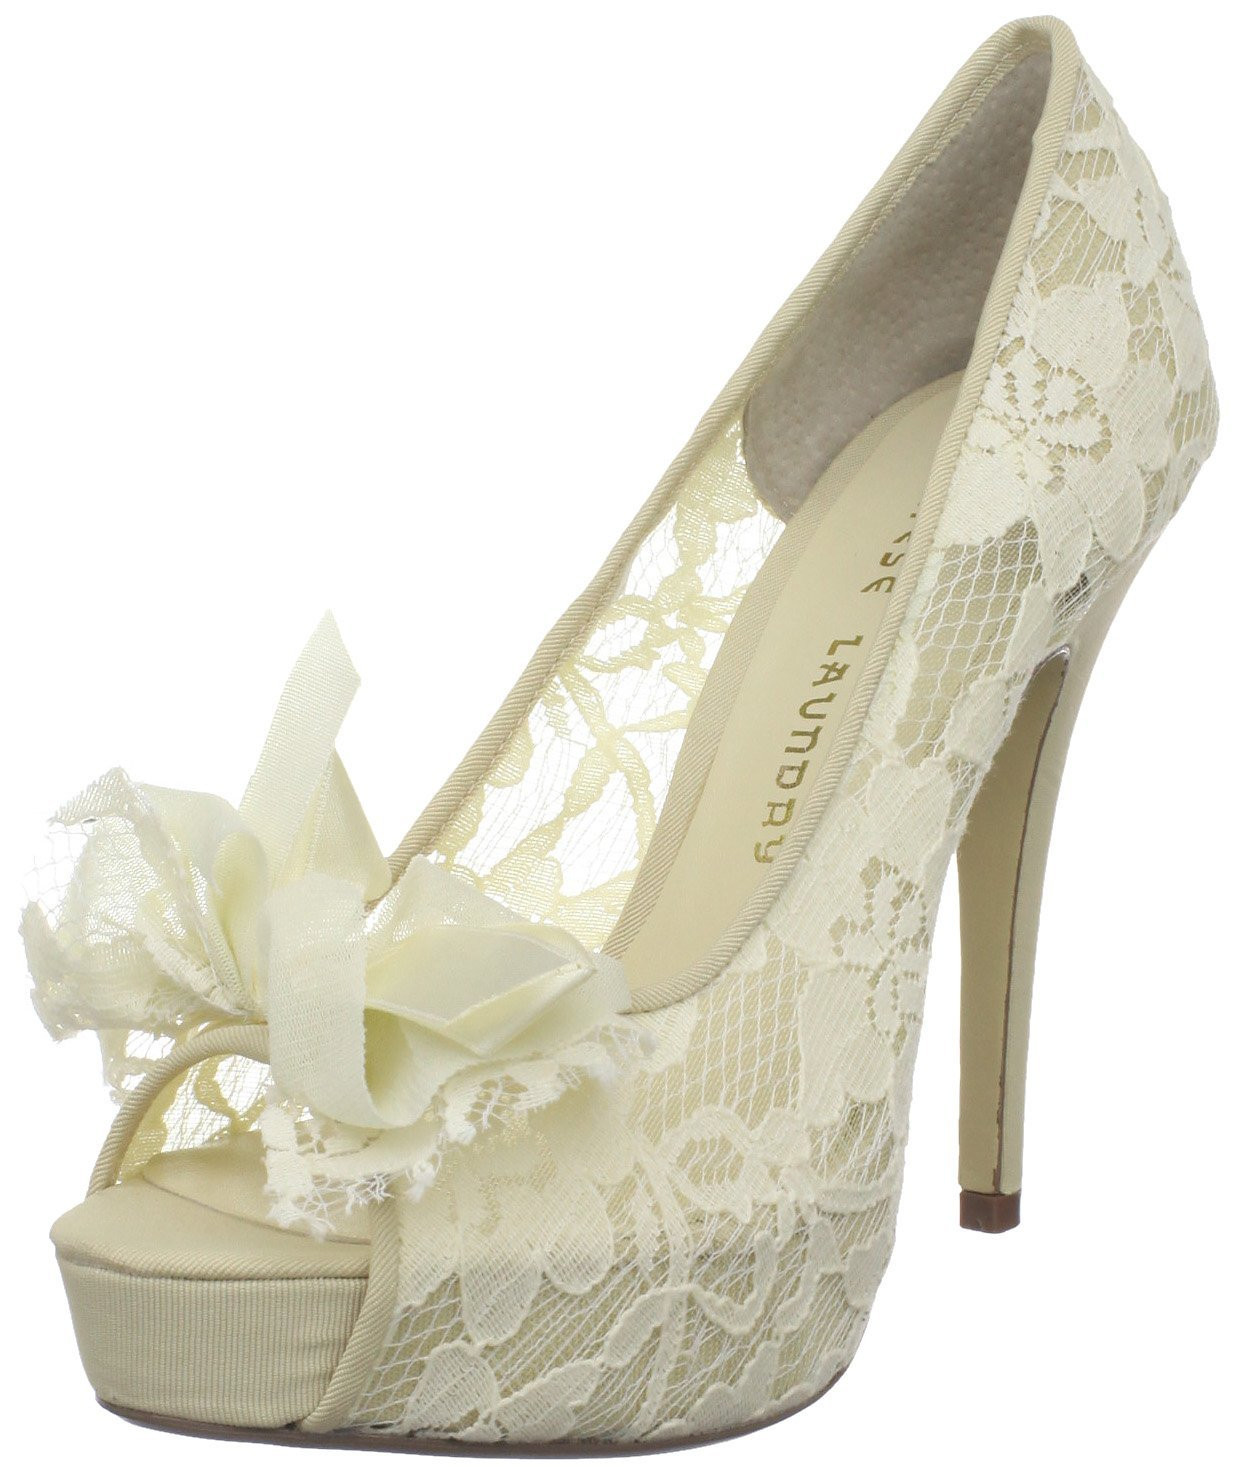 Wedding Shoes For Women
 fortable Lace Wedding Shoes